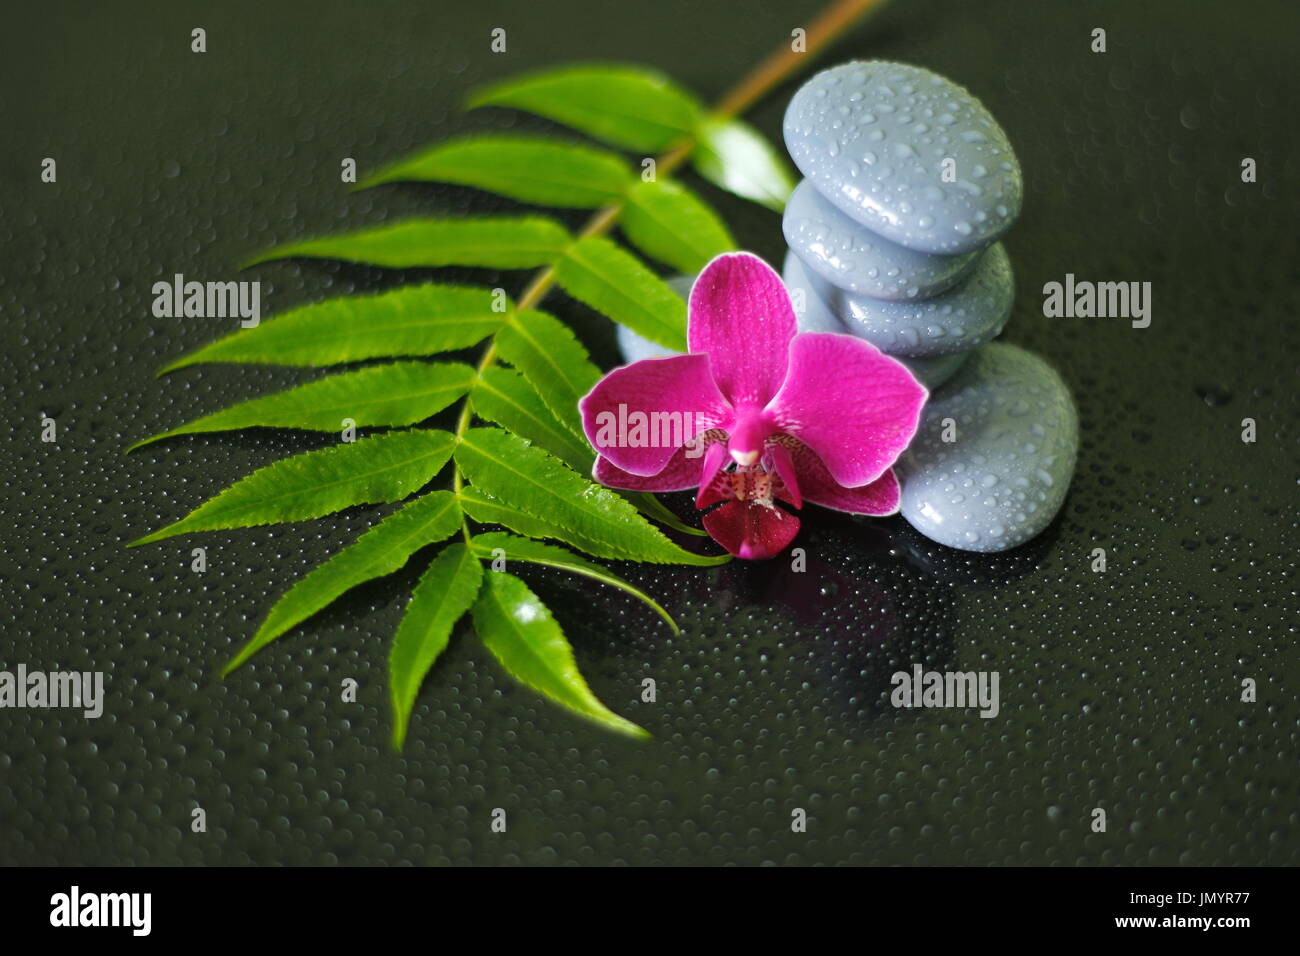 Gray pebbles arranged in zen lifestyle with an orchid, a branch of heather and drops of water on a glossy black background Stock Photo